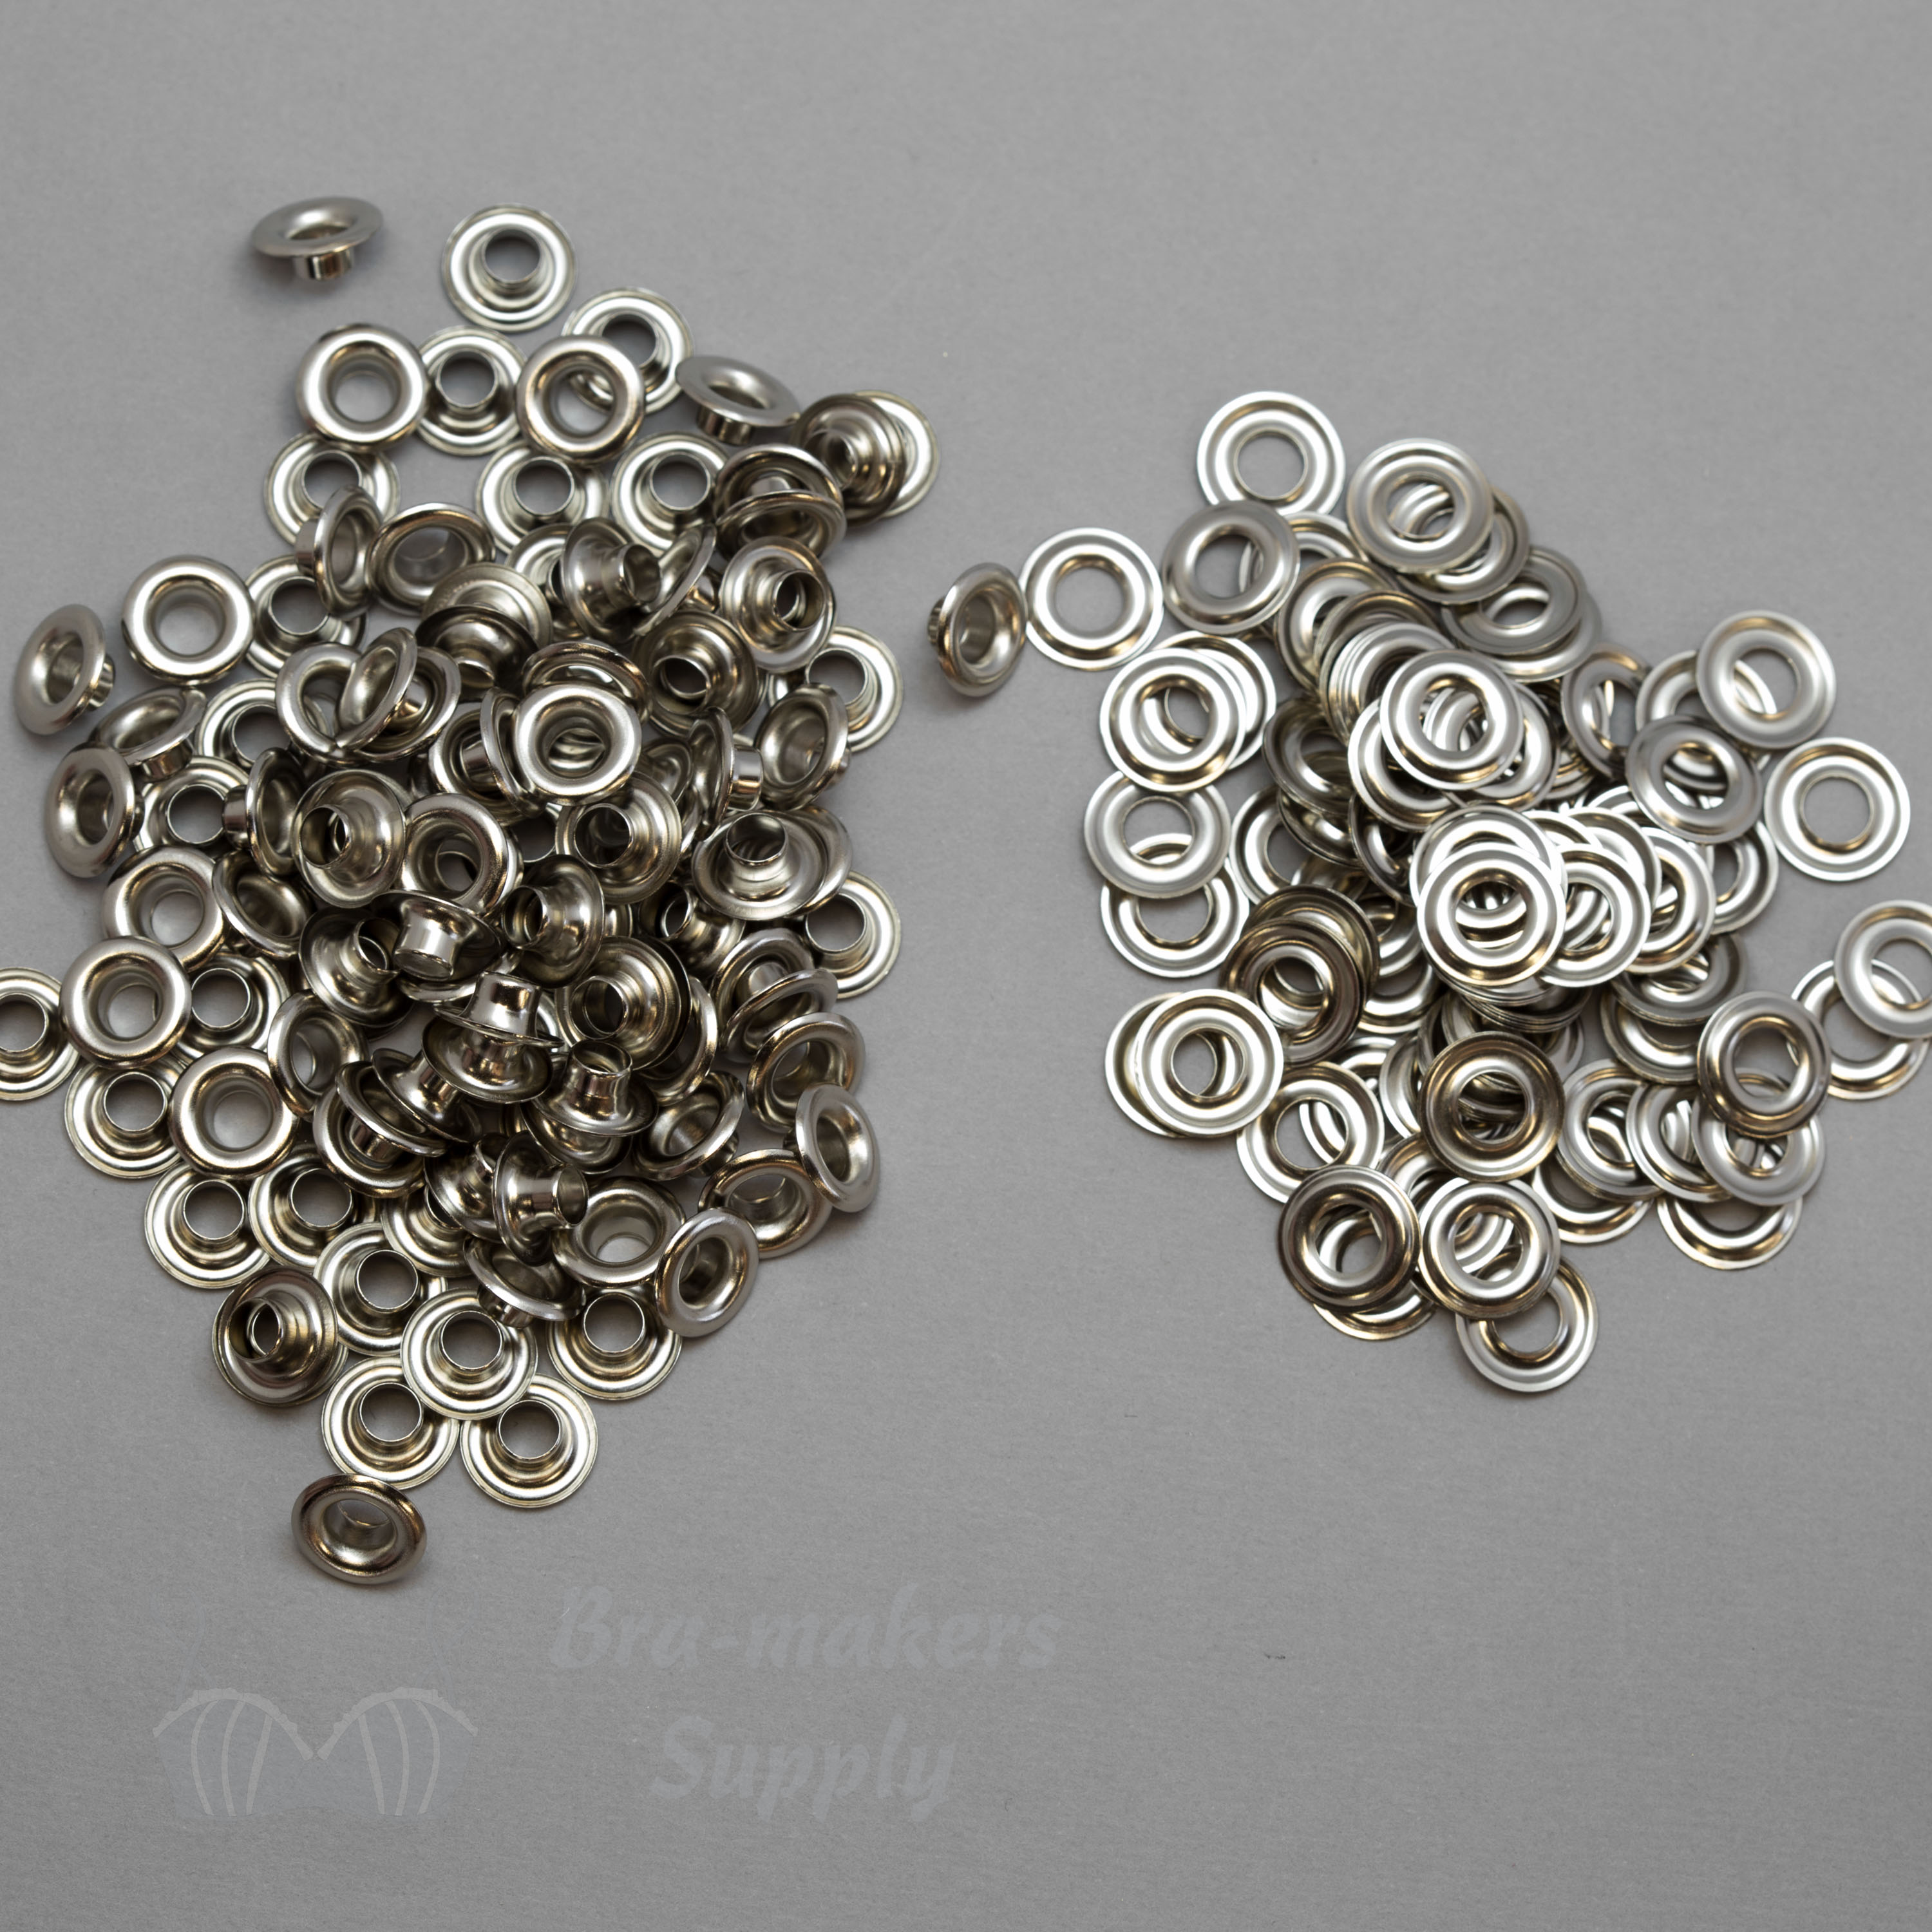 metal corset grommets or two part eyelets BG-00 nickel from Bra-Makers Supply package of 144 shown